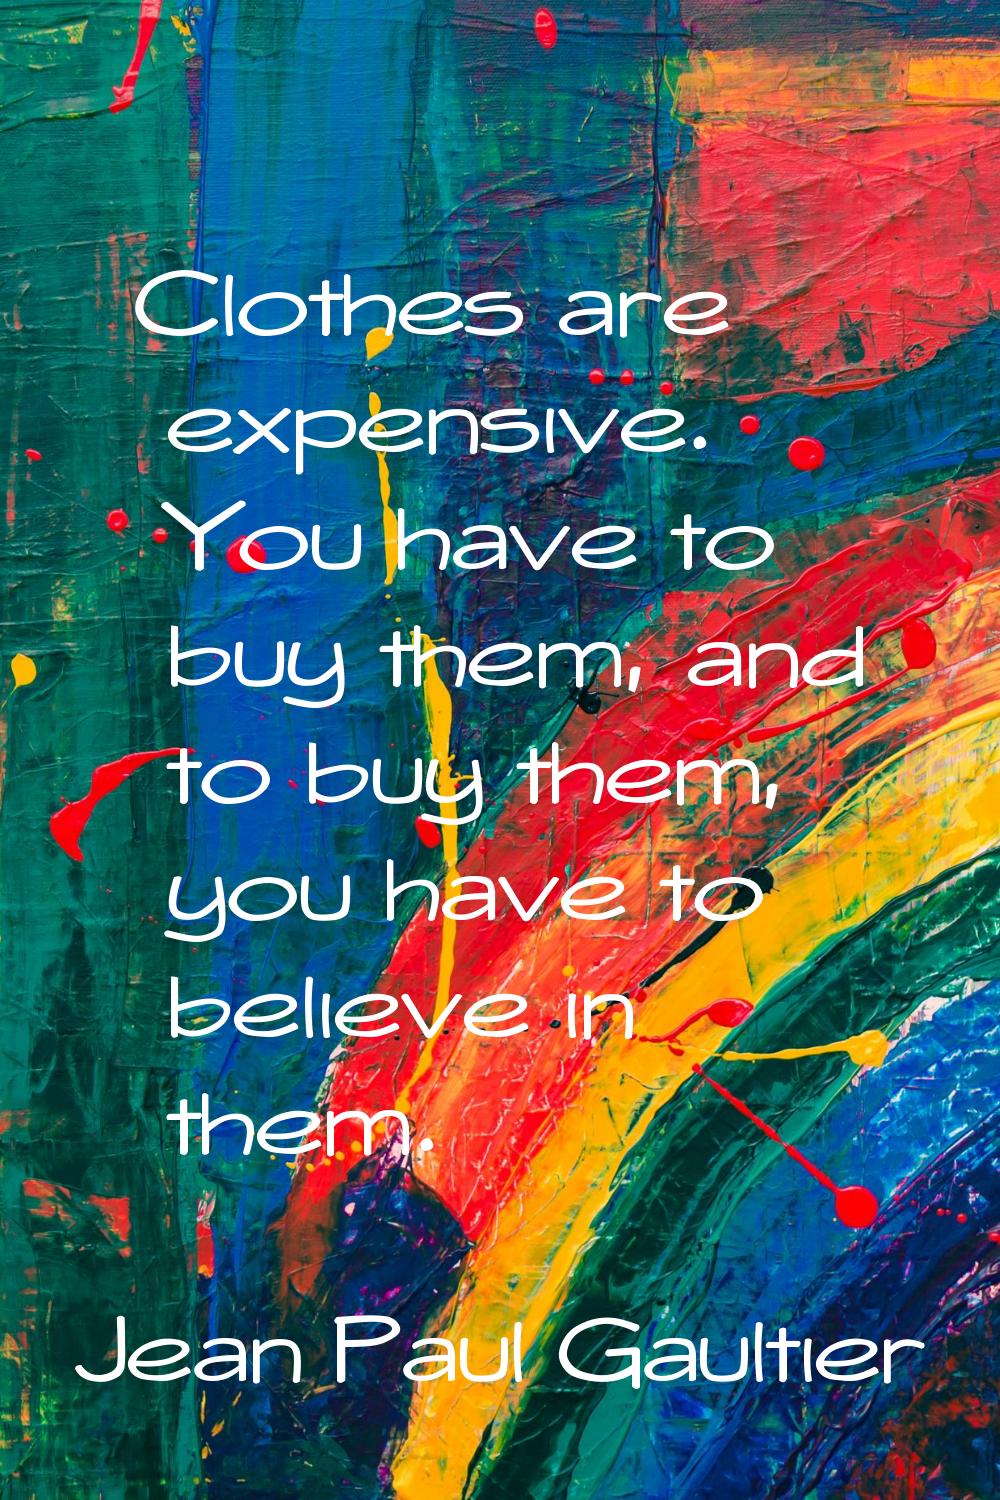 Clothes are expensive. You have to buy them, and to buy them, you have to believe in them.